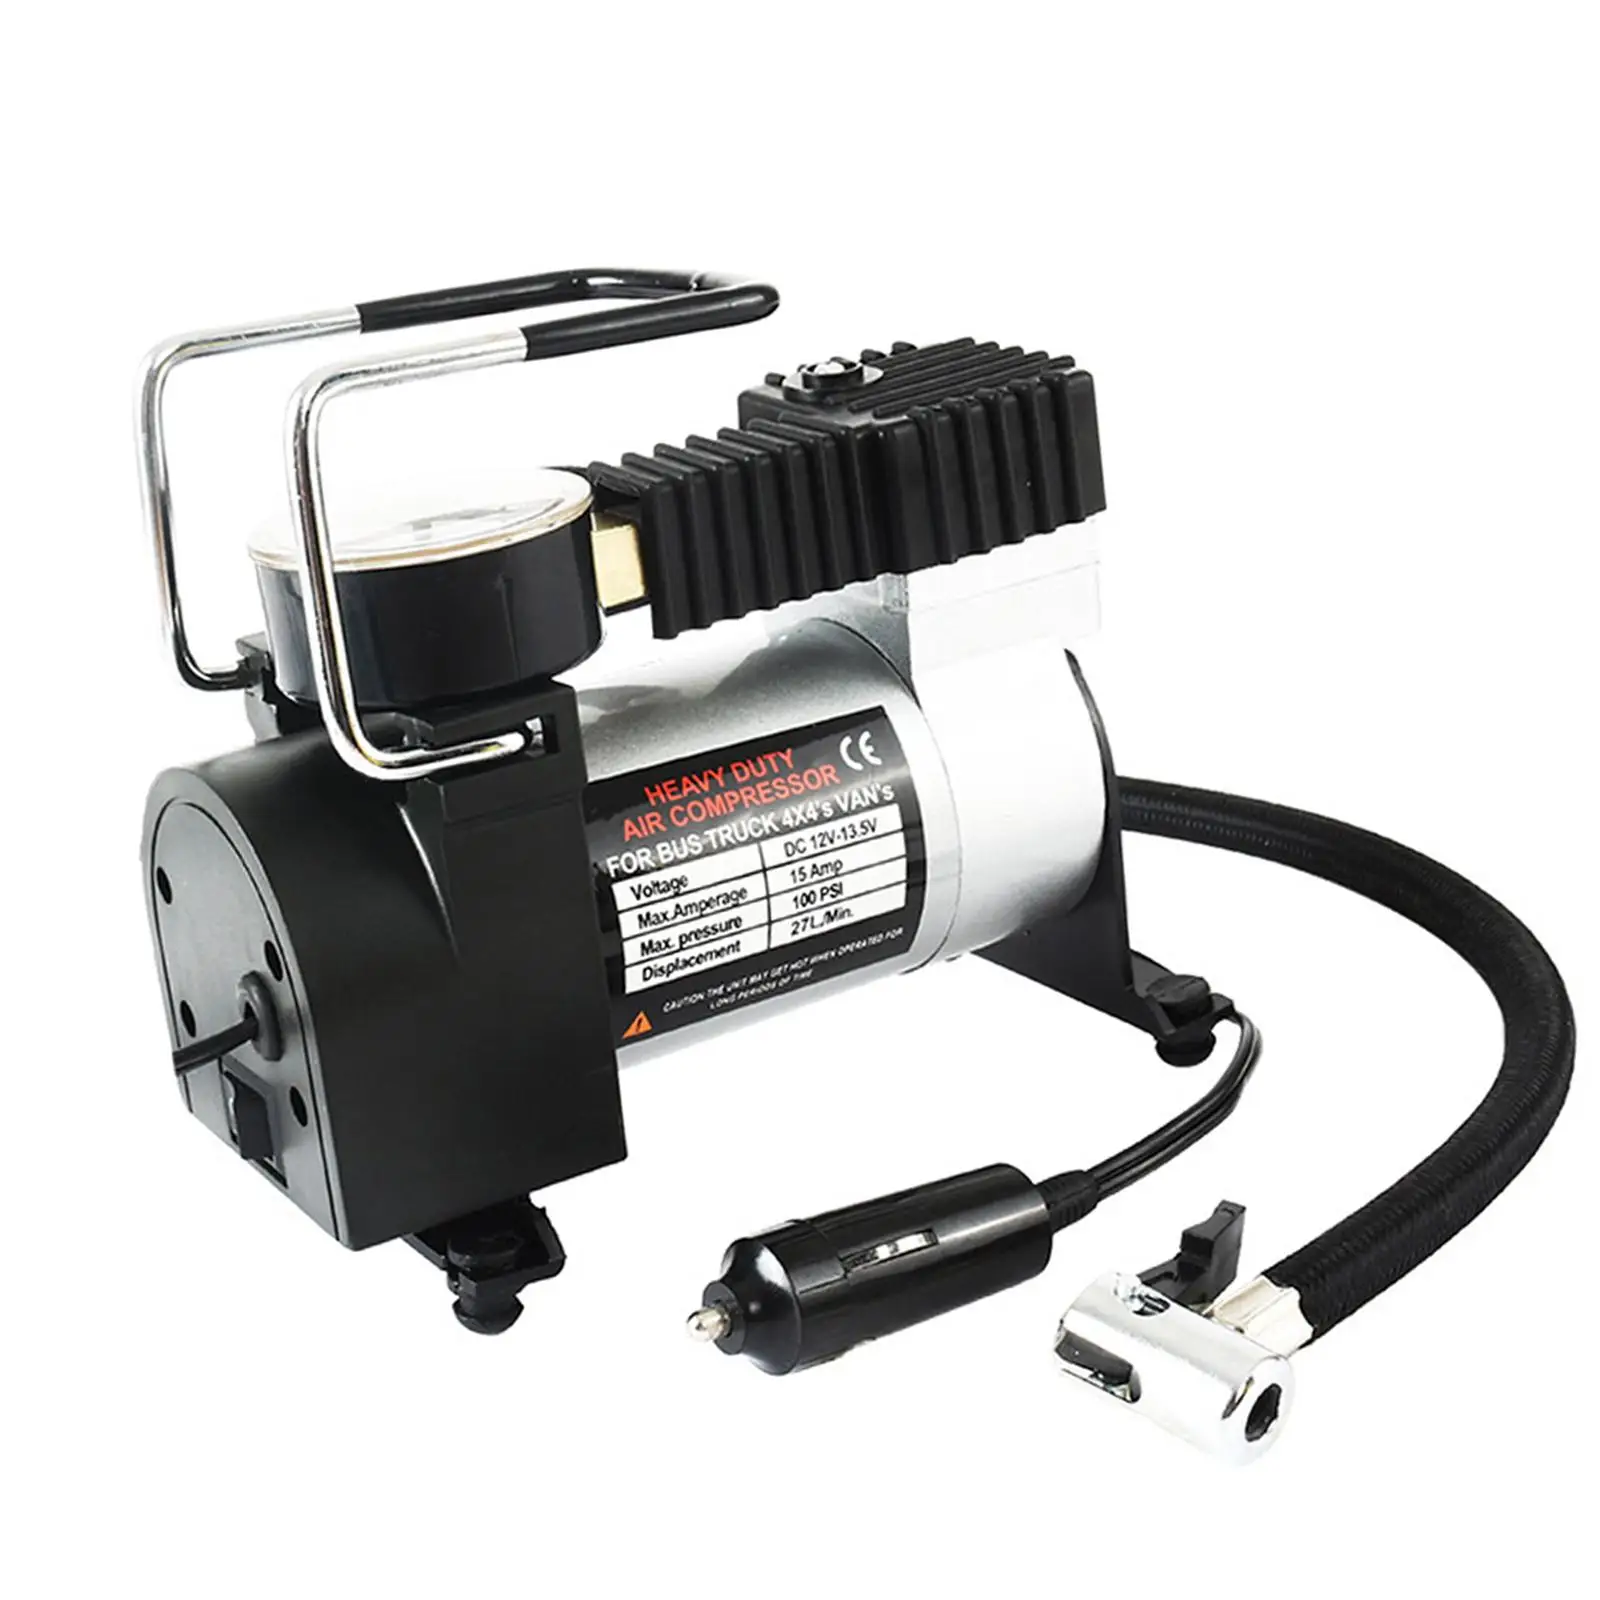 Tire Inflator Auto Accessories Electric Air Compressor Tire Electric Inflator Portable Car Tire Pump for Cars SUV Trucks